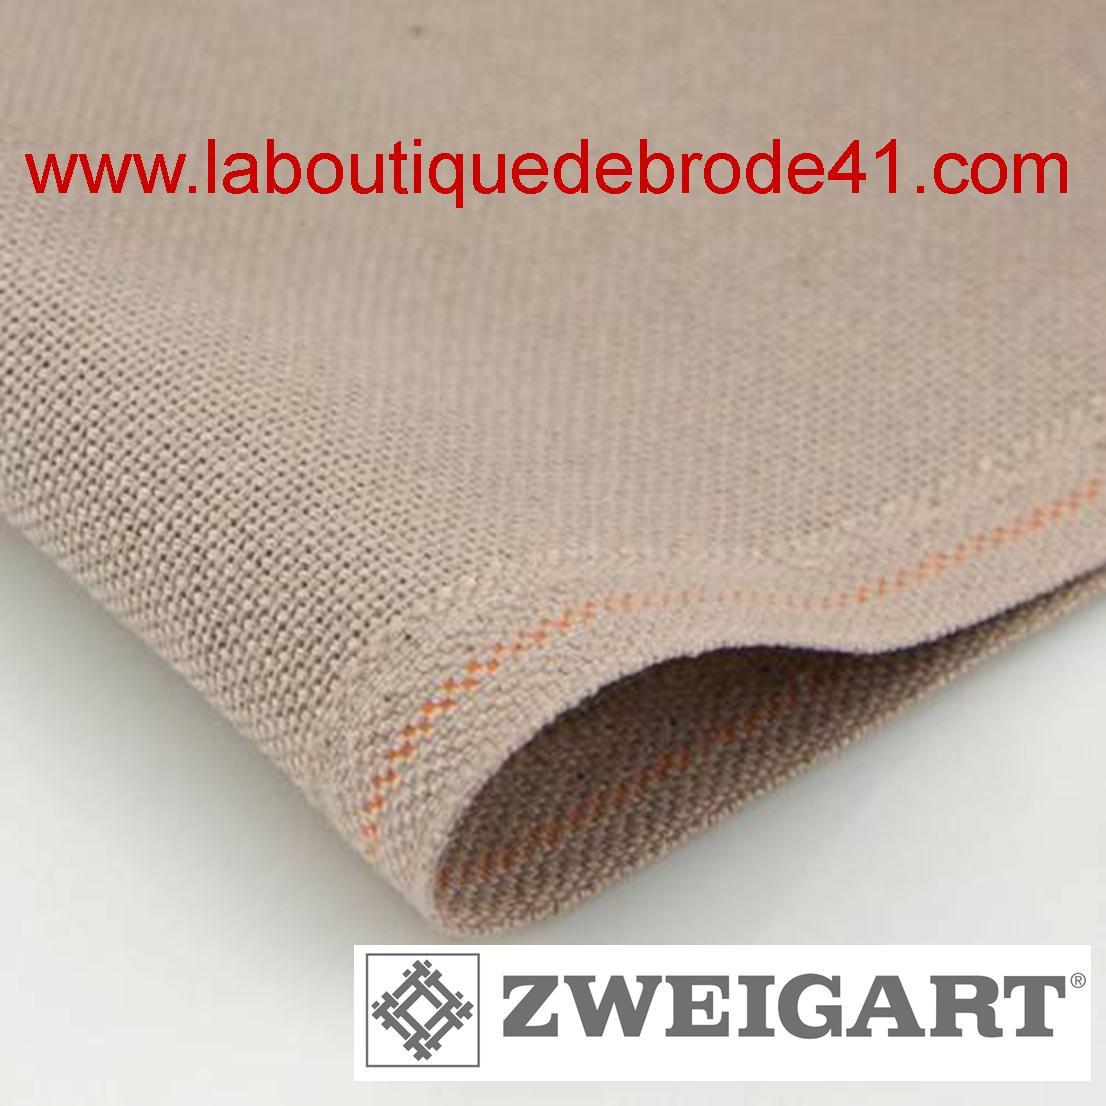 Toile a broder zweigart murano 3984 12 6 fils taupe 3021